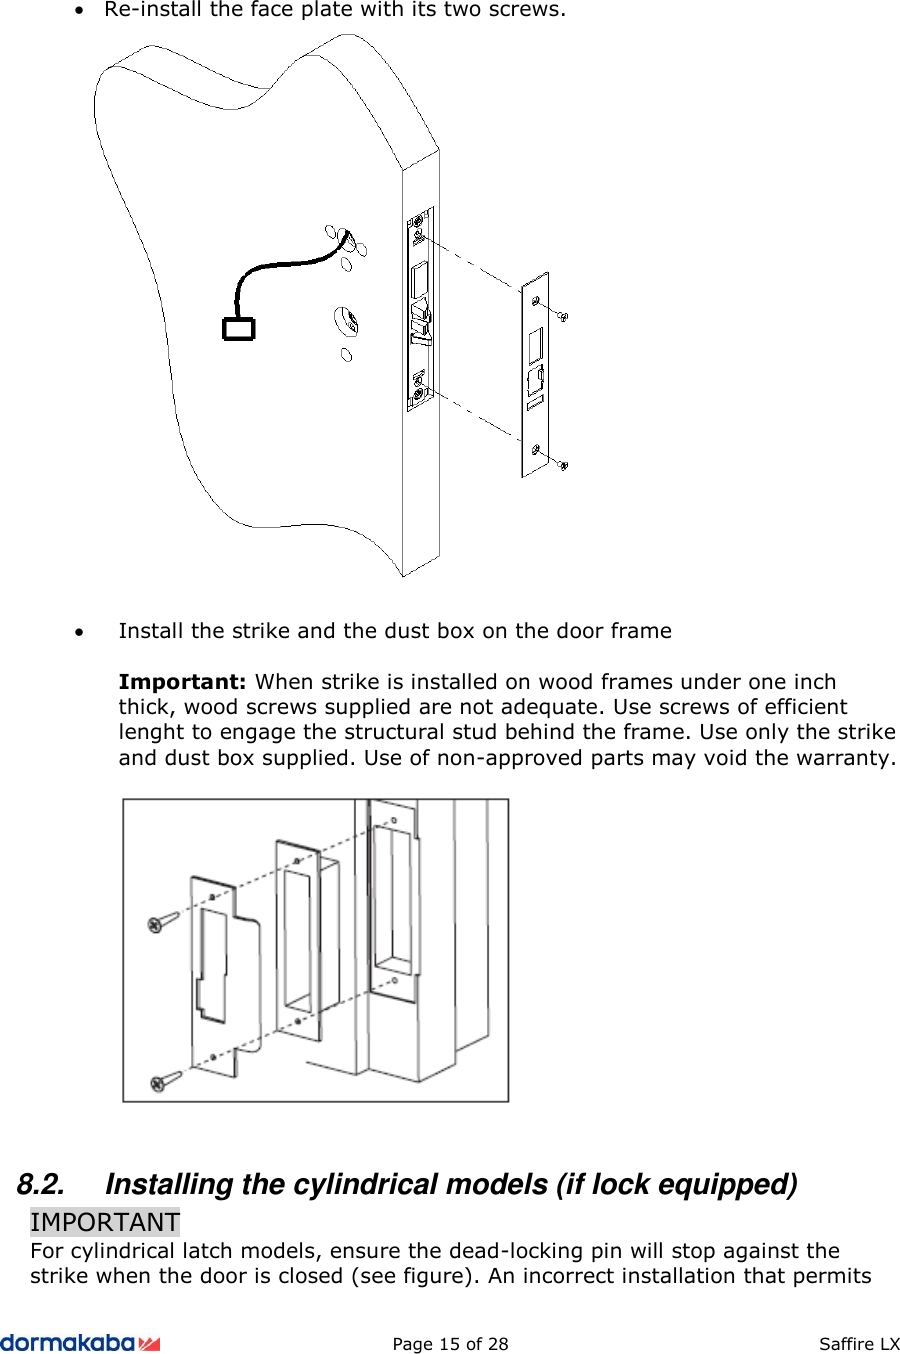          Page 15 of 28  Saffire LX      • Re-install the face plate with its two screws.   • Install the strike and the dust box on the door frame  Important: When strike is installed on wood frames under one inch thick, wood screws supplied are not adequate. Use screws of efficient lenght to engage the structural stud behind the frame. Use only the strike and dust box supplied. Use of non-approved parts may void the warranty.    8.2.  Installing the cylindrical models (if lock equipped) IMPORTANT For cylindrical latch models, ensure the dead-locking pin will stop against the strike when the door is closed (see figure). An incorrect installation that permits 